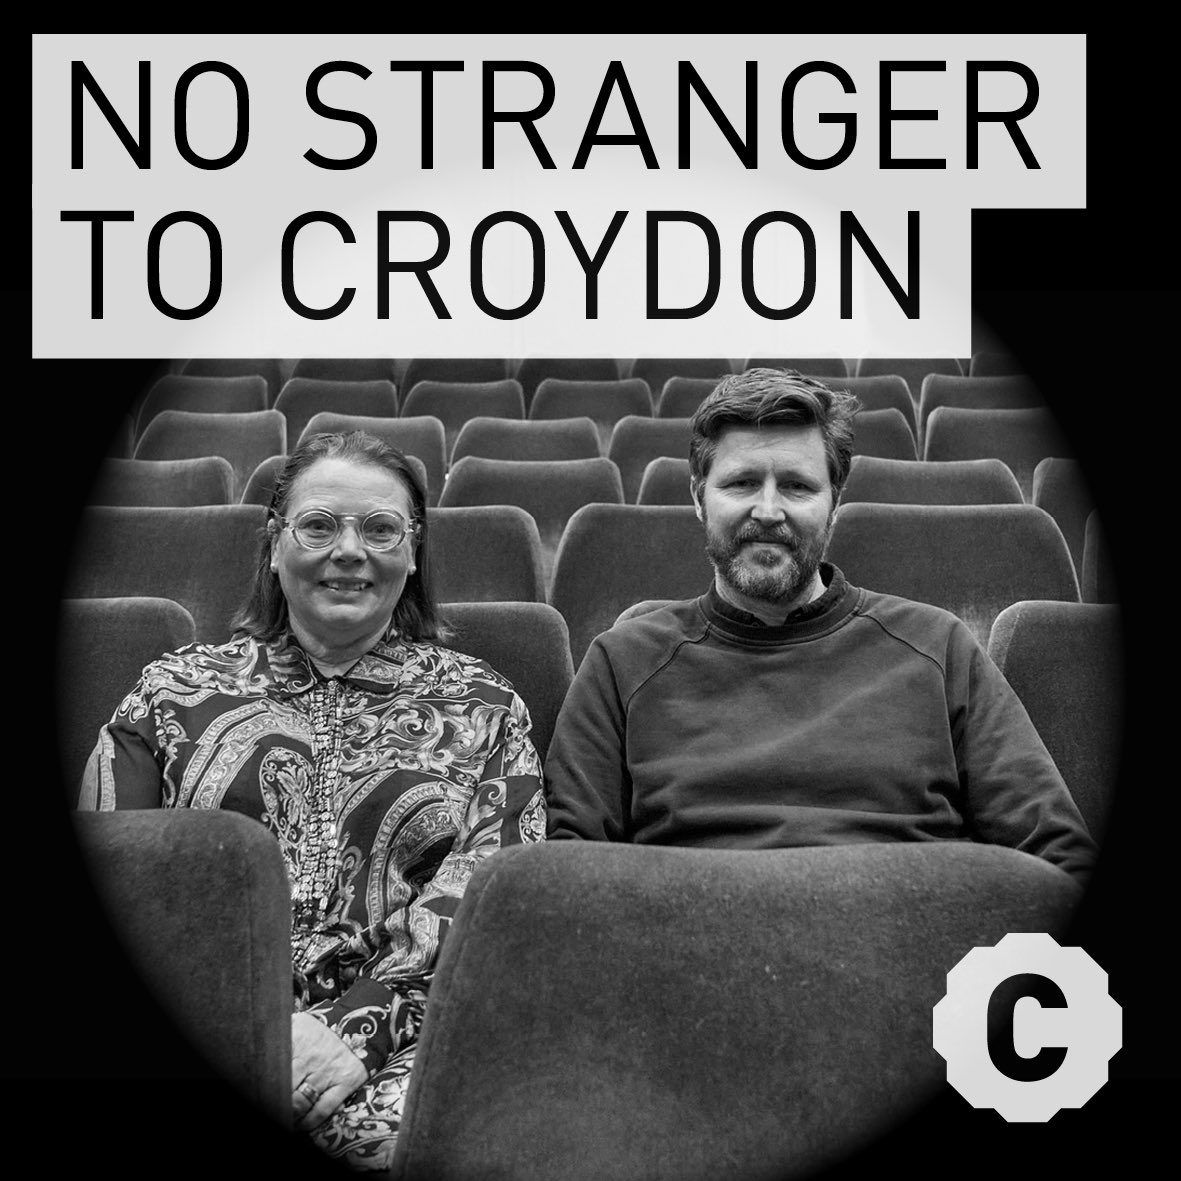 In this week’s feature we review the excellent screening and Q&A we attended last week at @SaveDavidLean where we heard director Andrew Haigh talk about his Croydon-based film #allofusstrangers with Joanna Scanlan and Guardian film critic Peter Bradshaw 🎥 croydonist.co.uk/andrew-haigh/